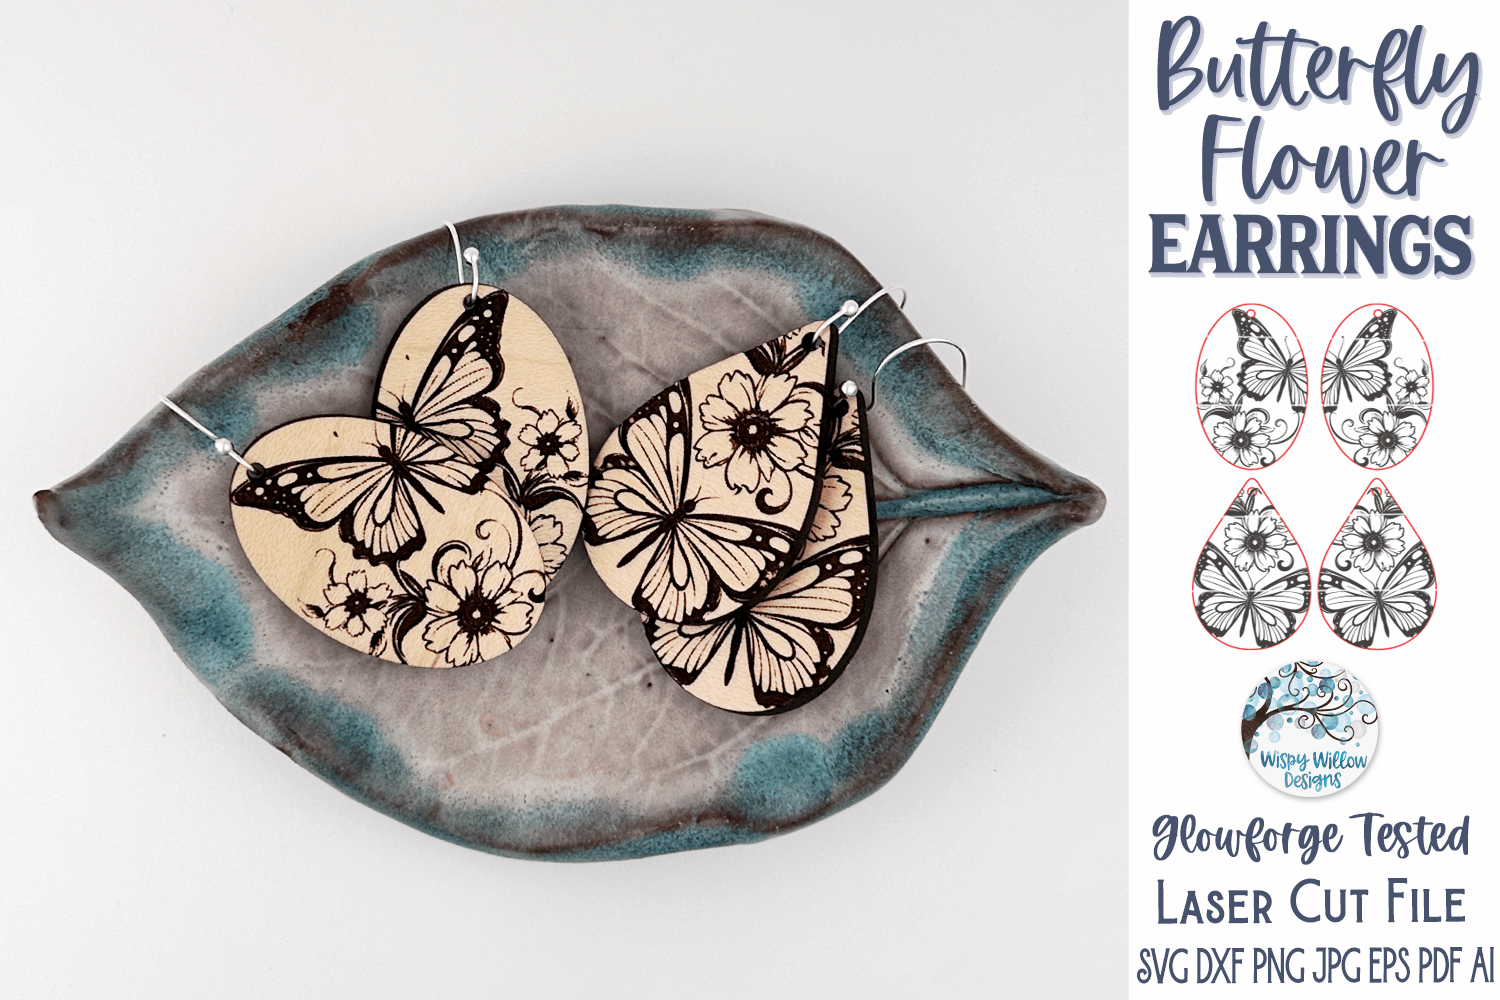 Butterfly Flower Earring Files for Glowforge or Laser Wispy Willow Designs Company